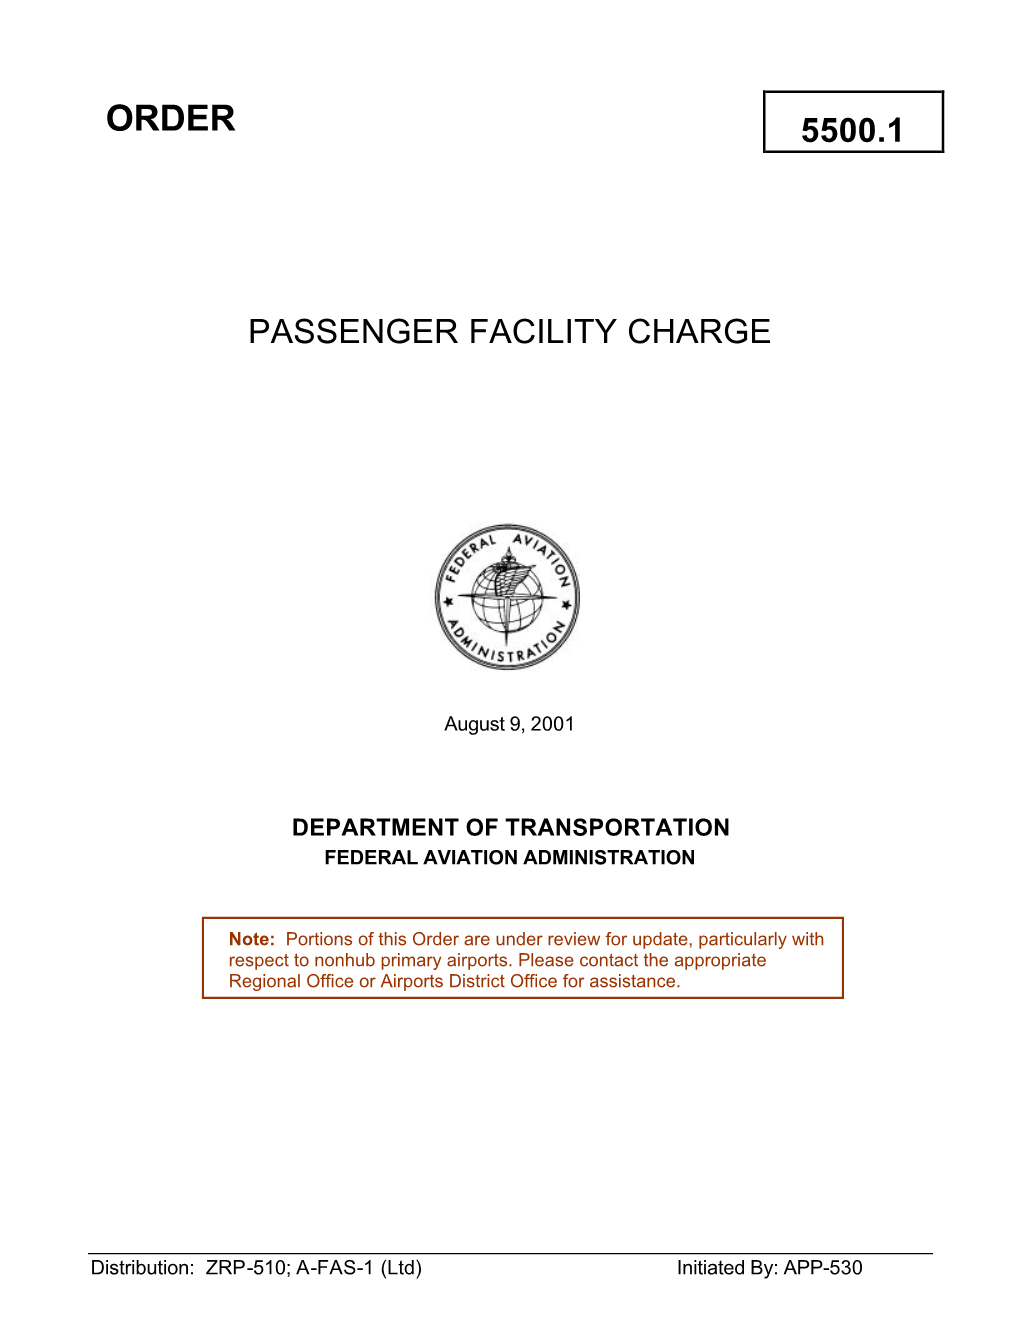 Passenger Facility Charge (PFC) Order 5500.1